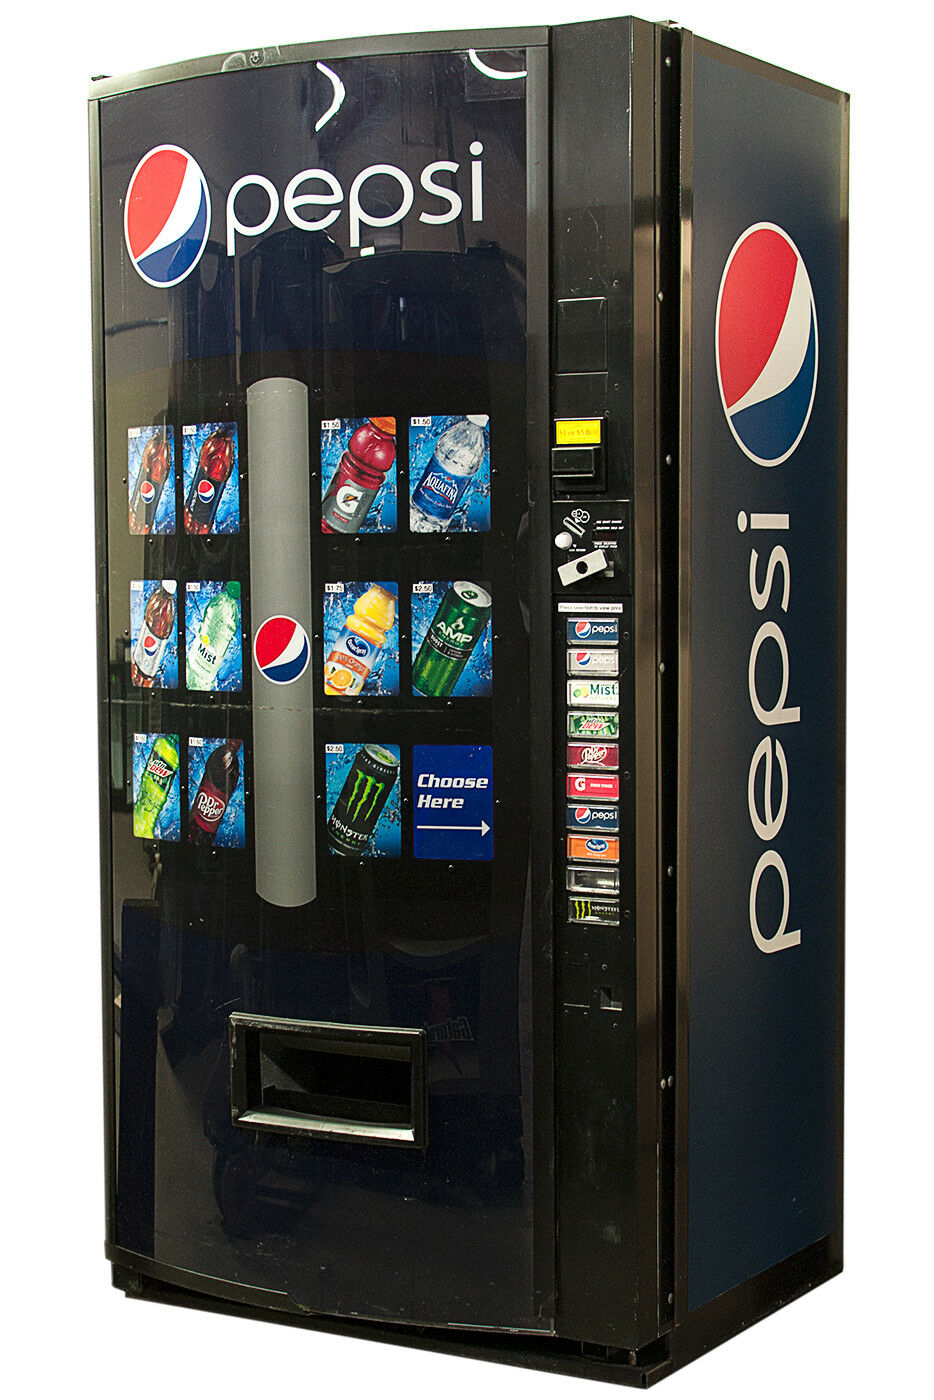 Vendo 630 Vending Machine W/ Pepsi Graphic Cans & Bottles Free Shipping